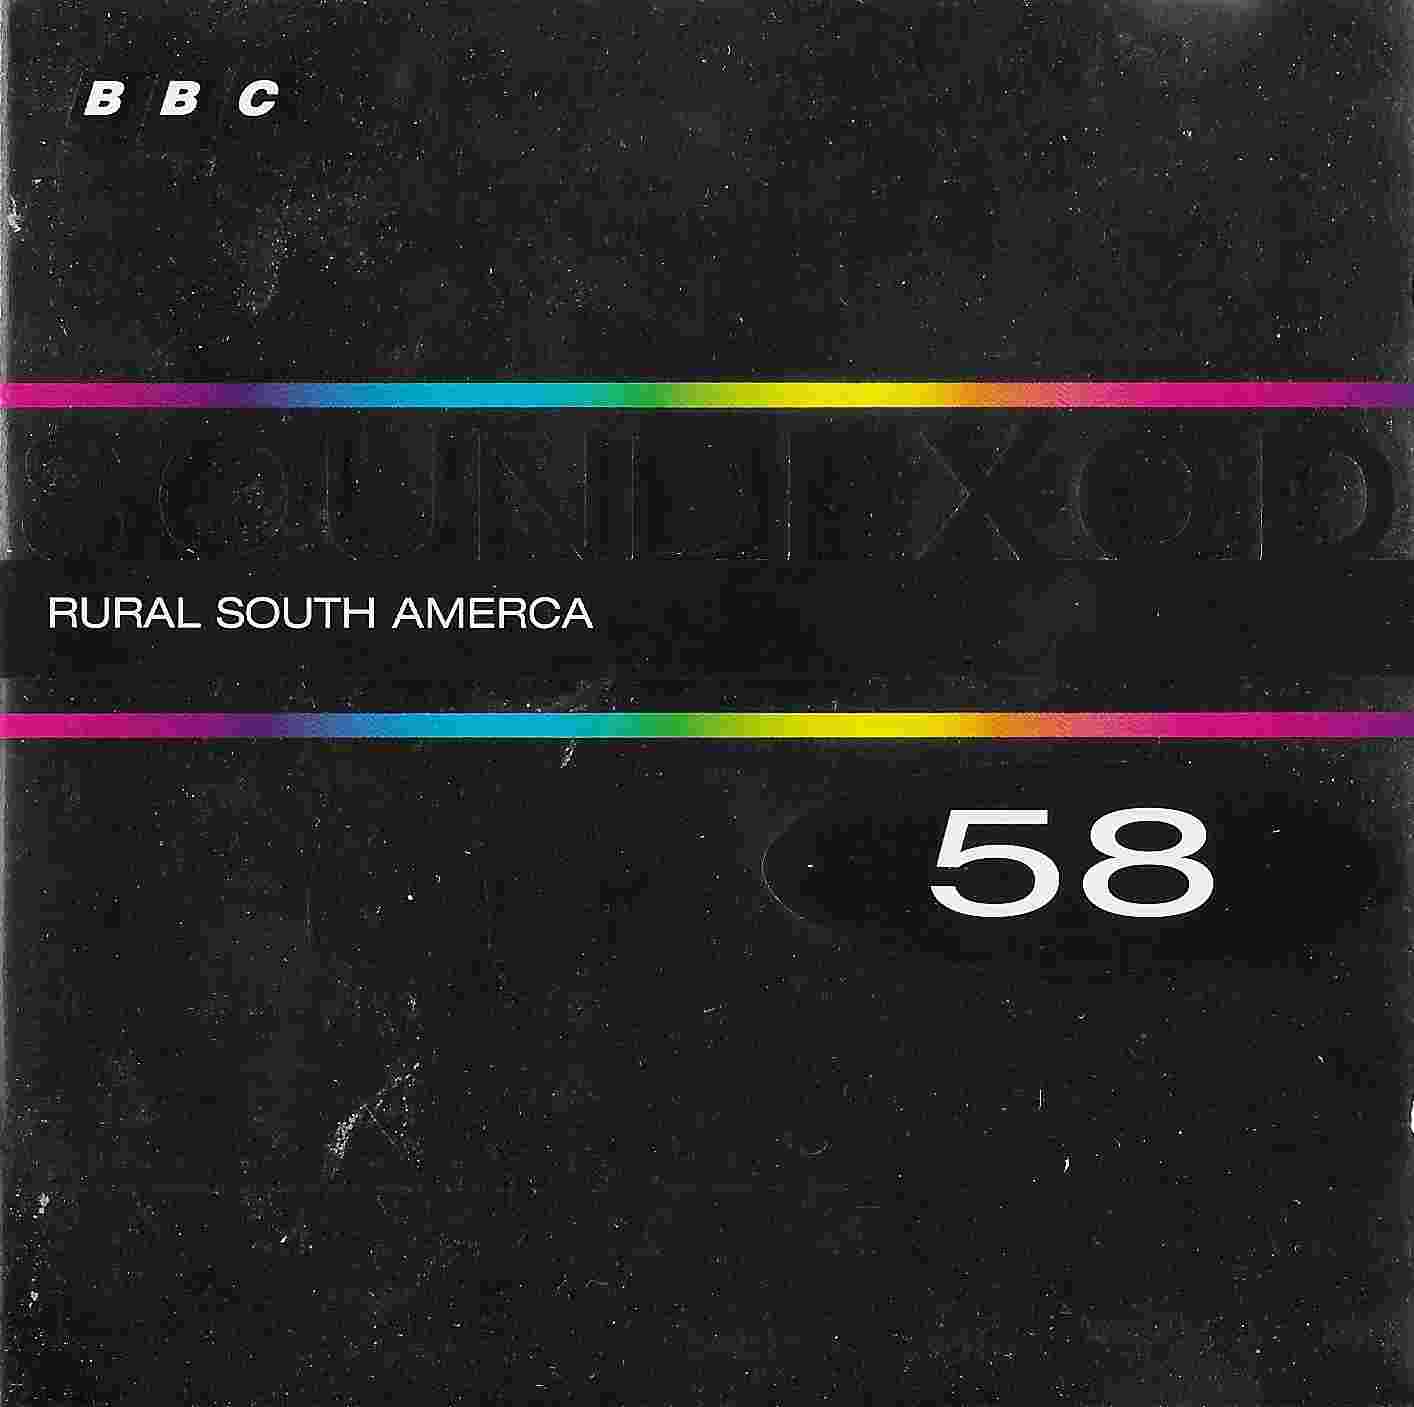 Front cover of BBCCD SFX058